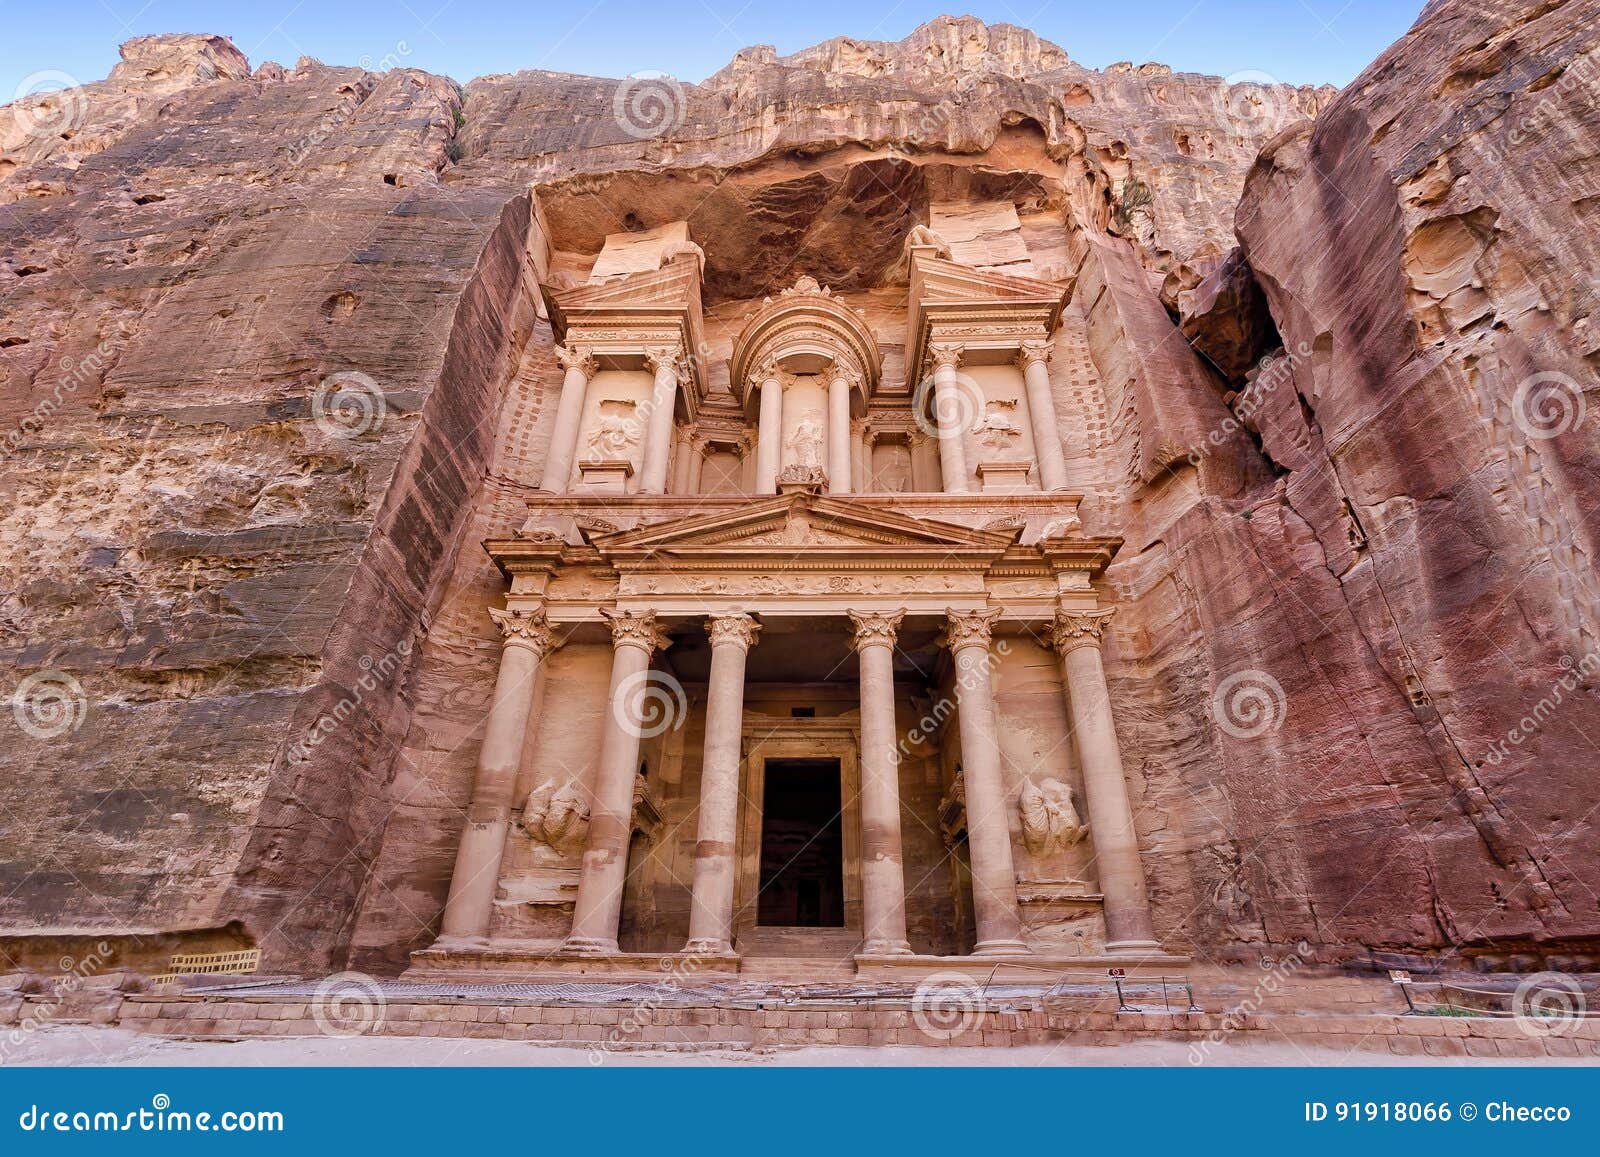 frontal view of `the treasury`, one of the most elaborate temples in the ancient arab nabatean kingdom city of petra, jordan